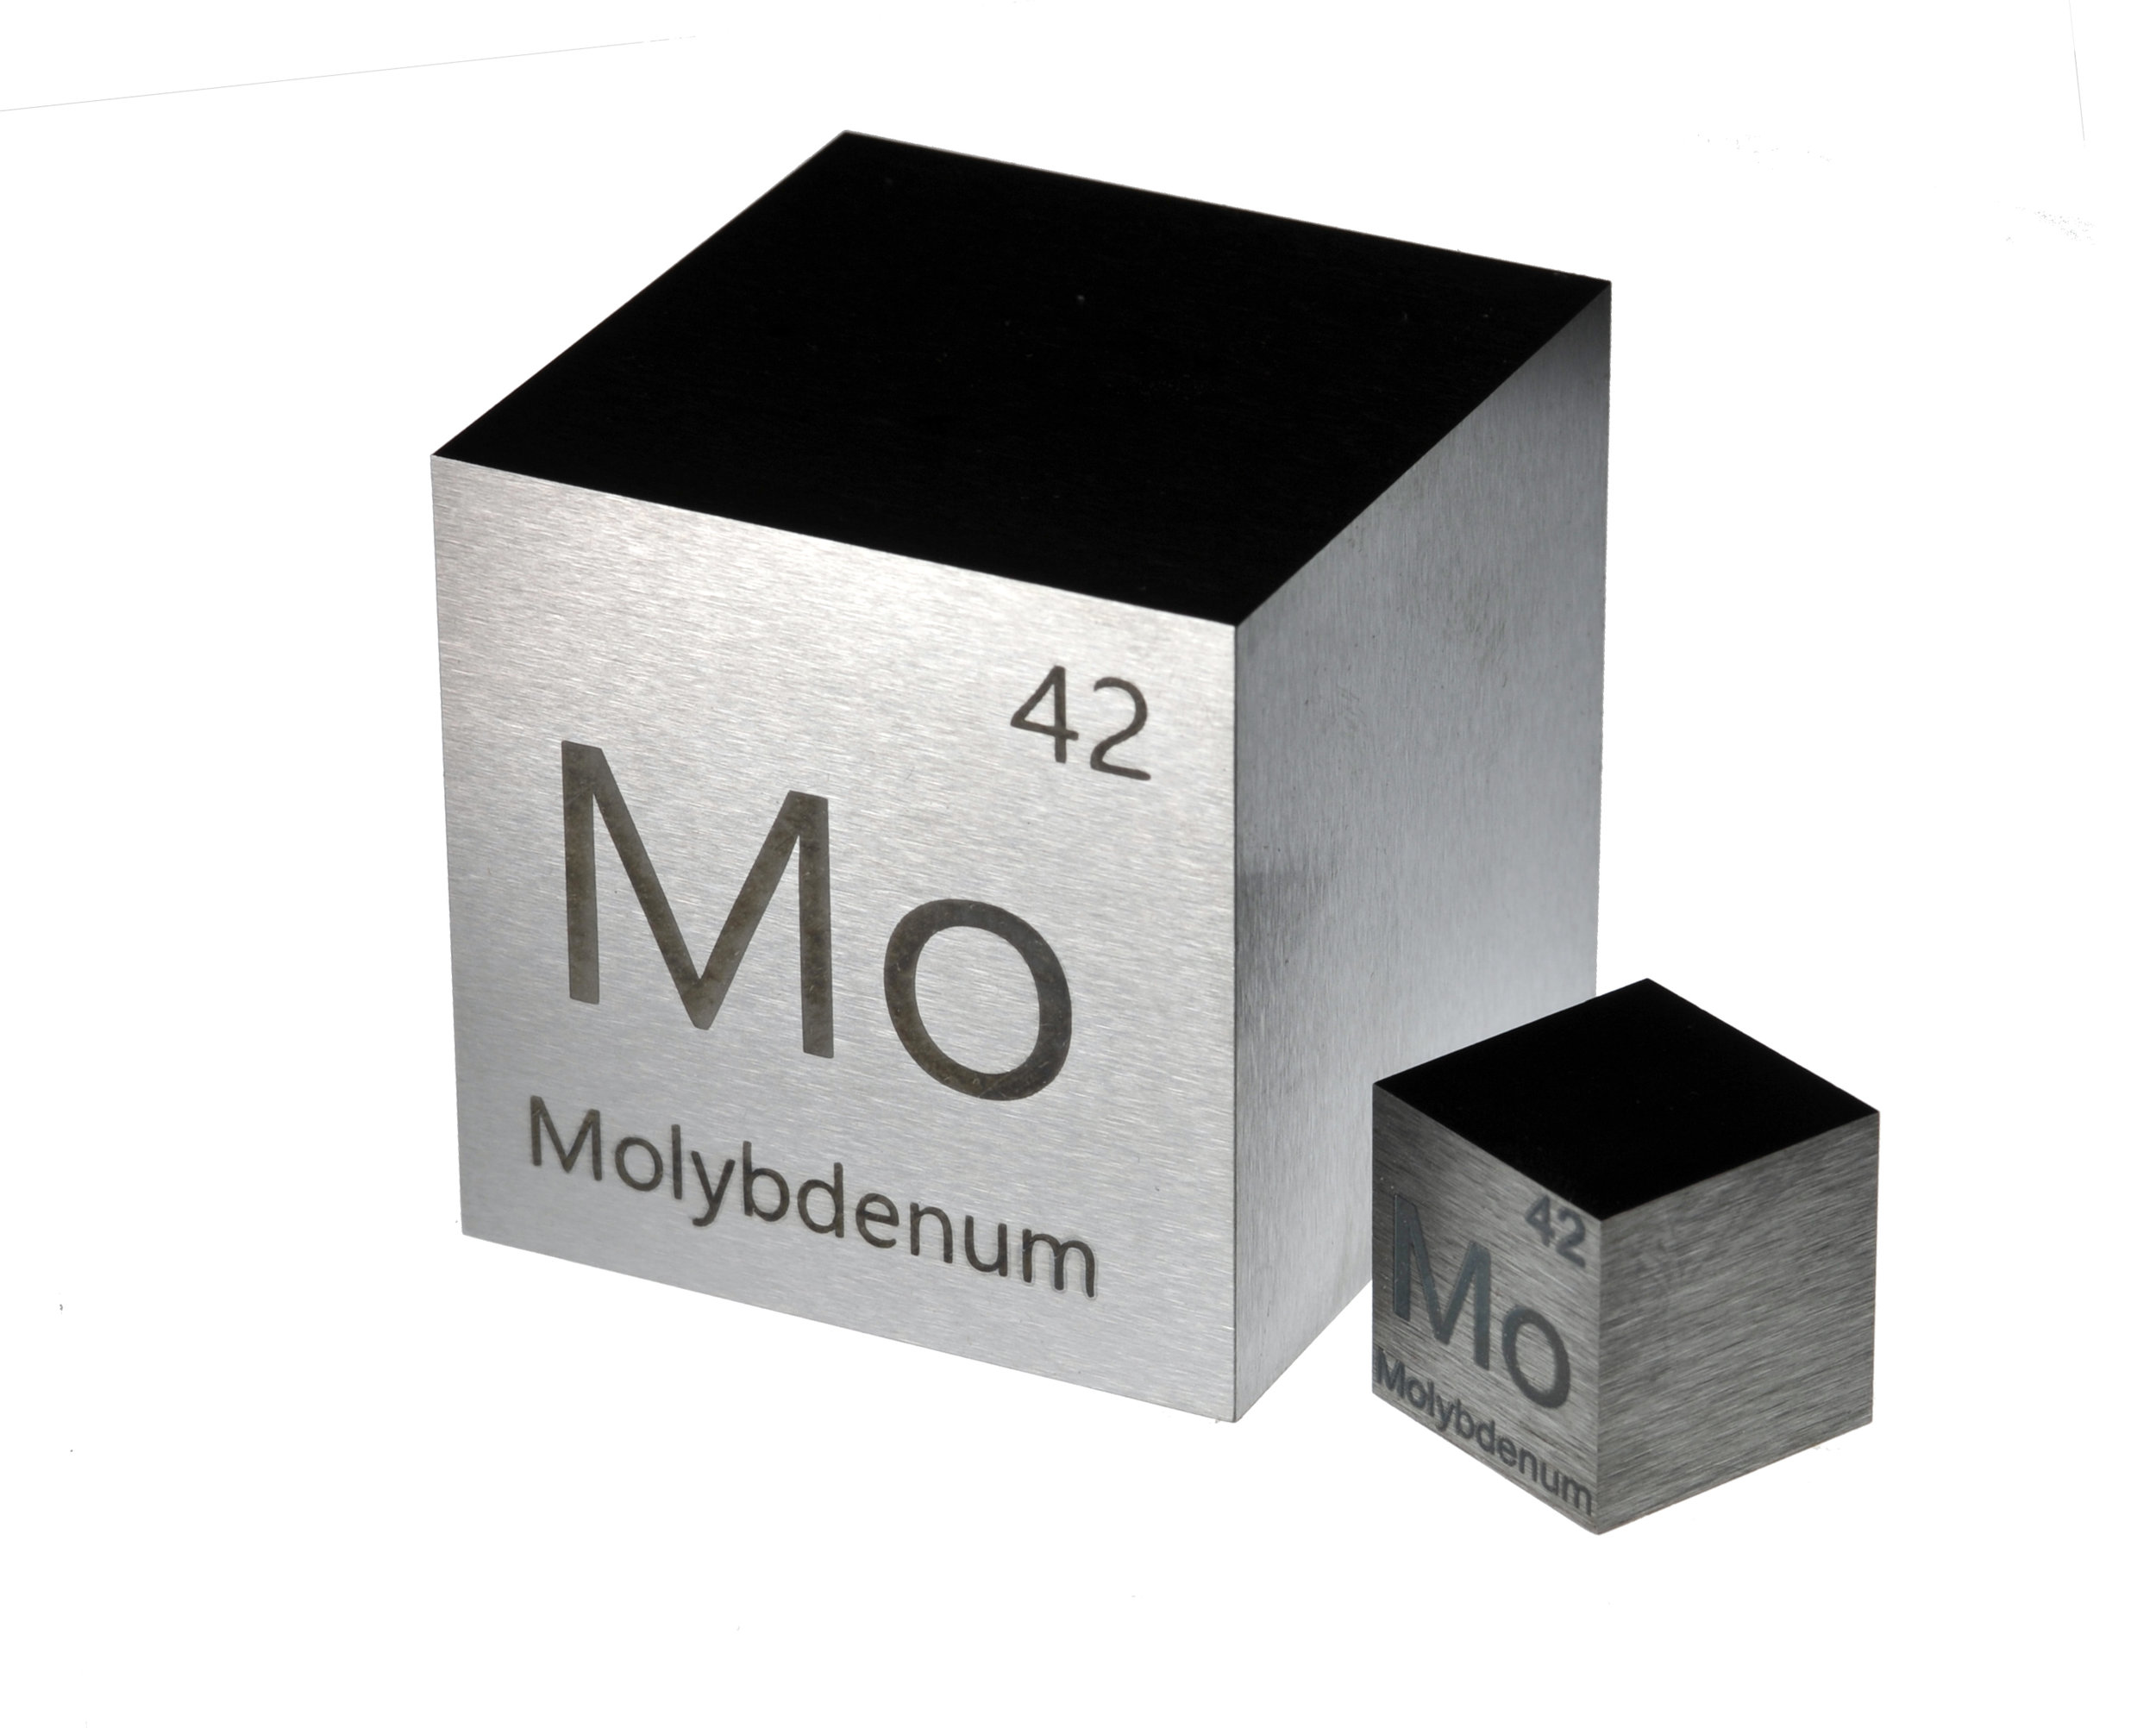 GOONSDS Molybdenum Metal Cube 99.93% Engraved Periodic Table 10mm/0.39Inch Mo Specimen for Laboratory and Collect Decorate 